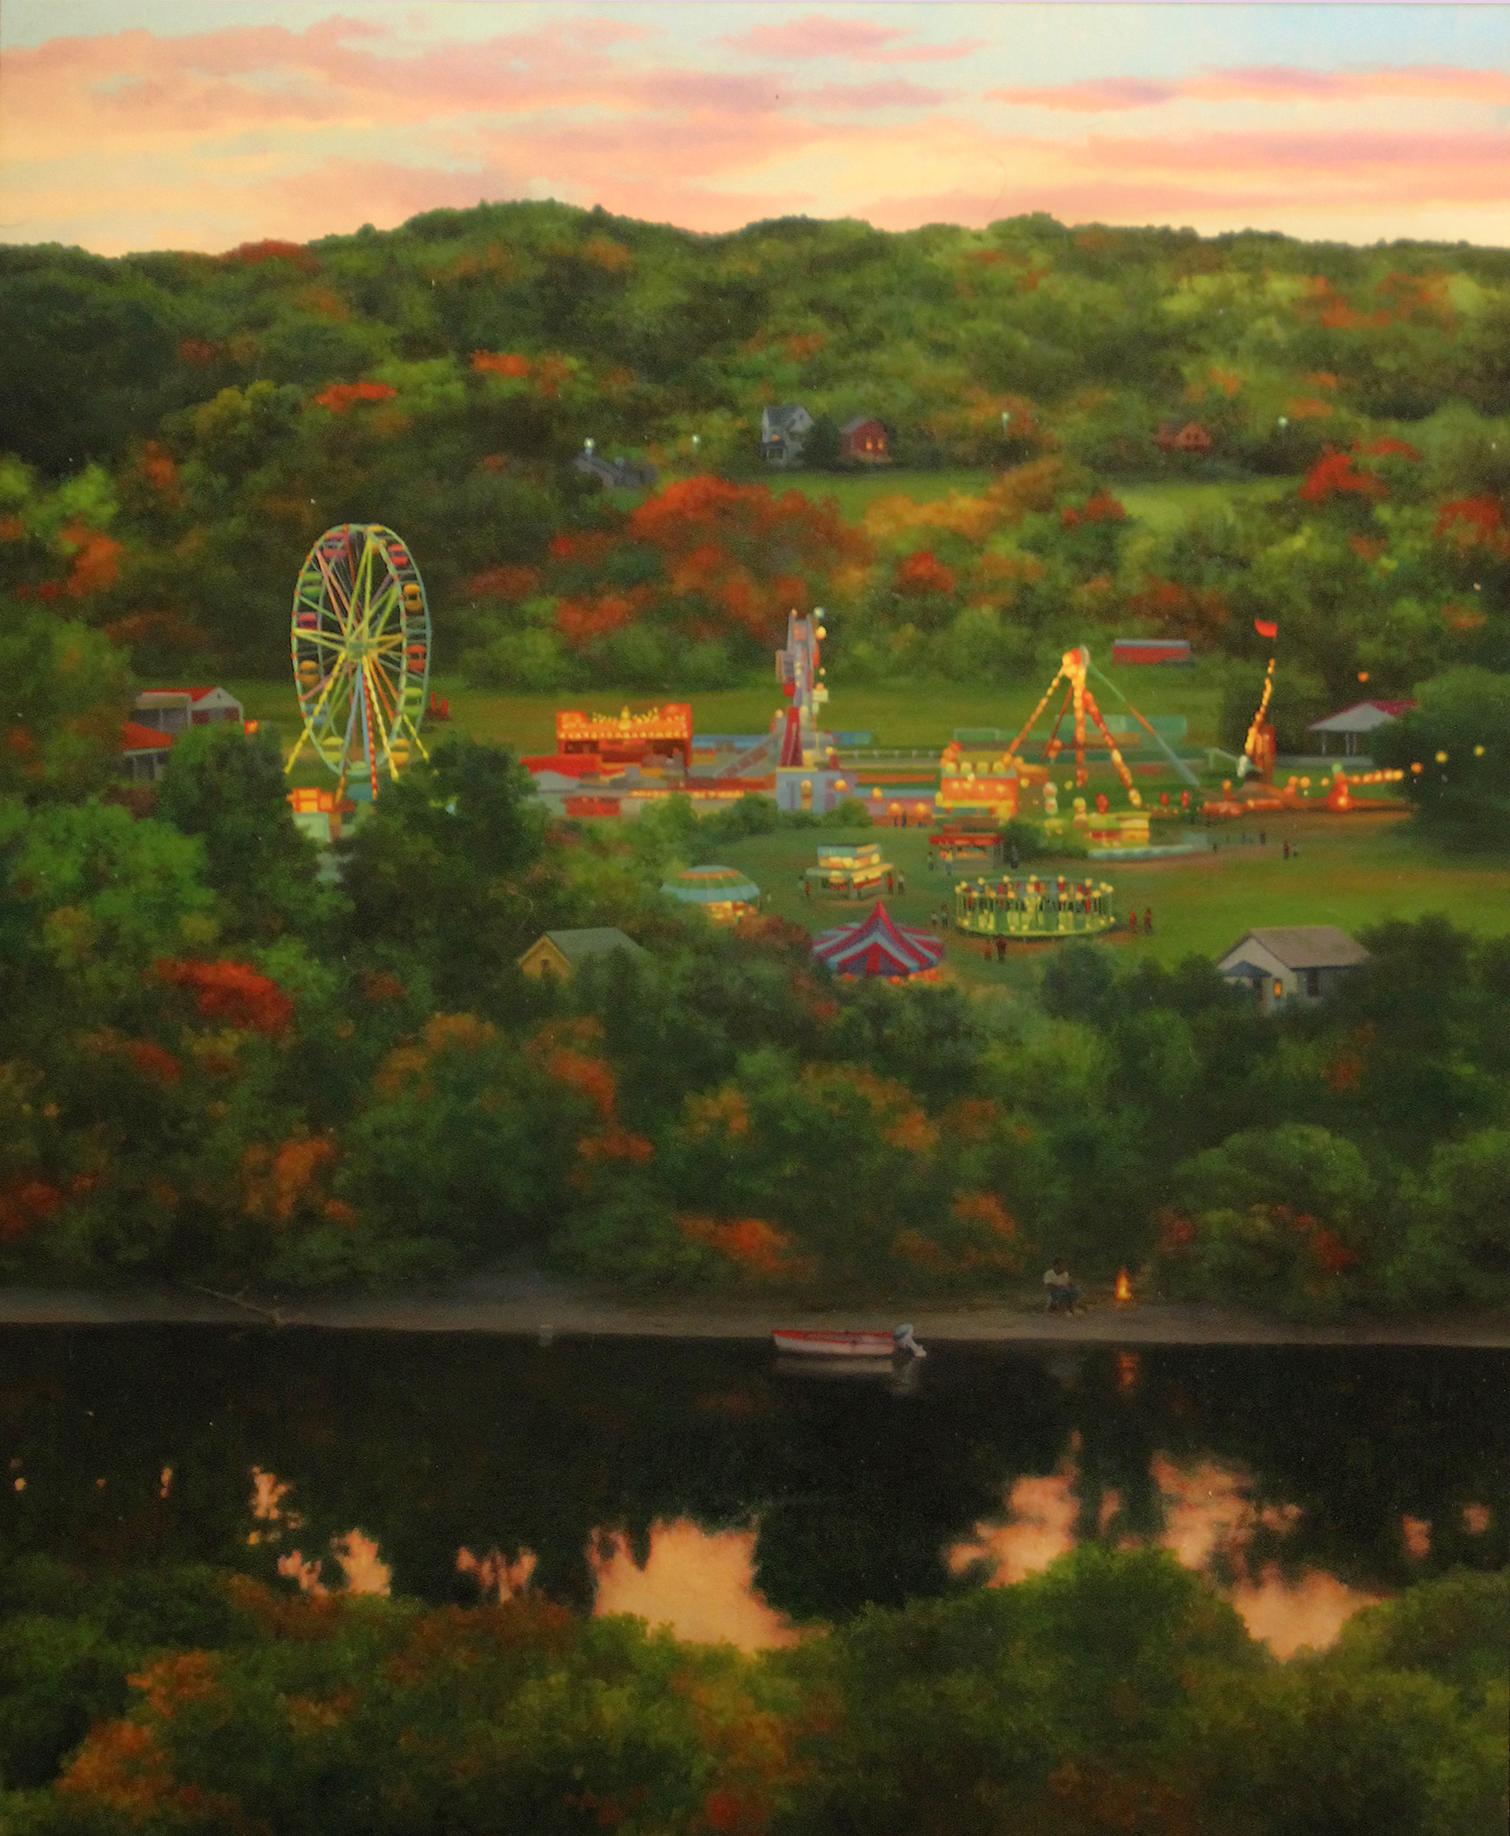 Scott Prior Landscape Painting - Realist painting with green and red, "Fairgrounds on the River", oil on panel